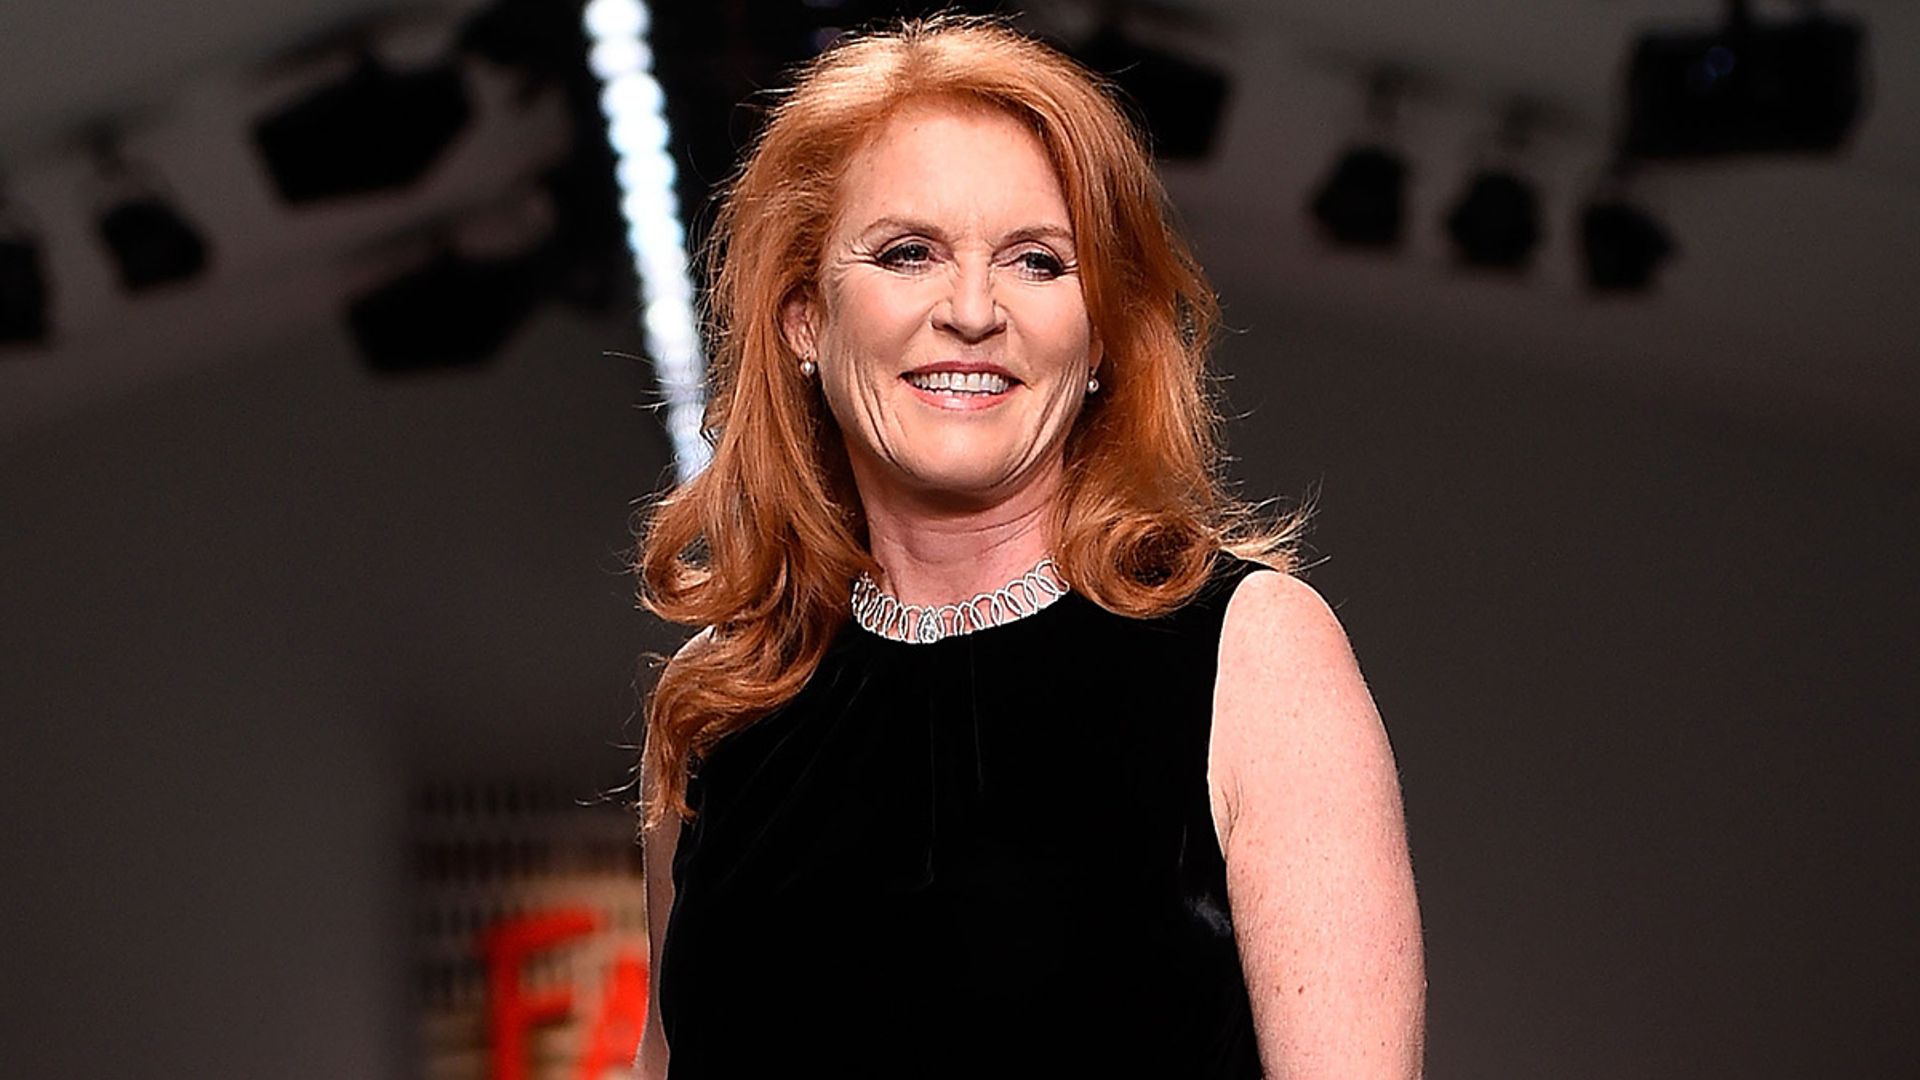 Sarah, Duchess of York's nutritionist reveals her diet and weight loss secrets